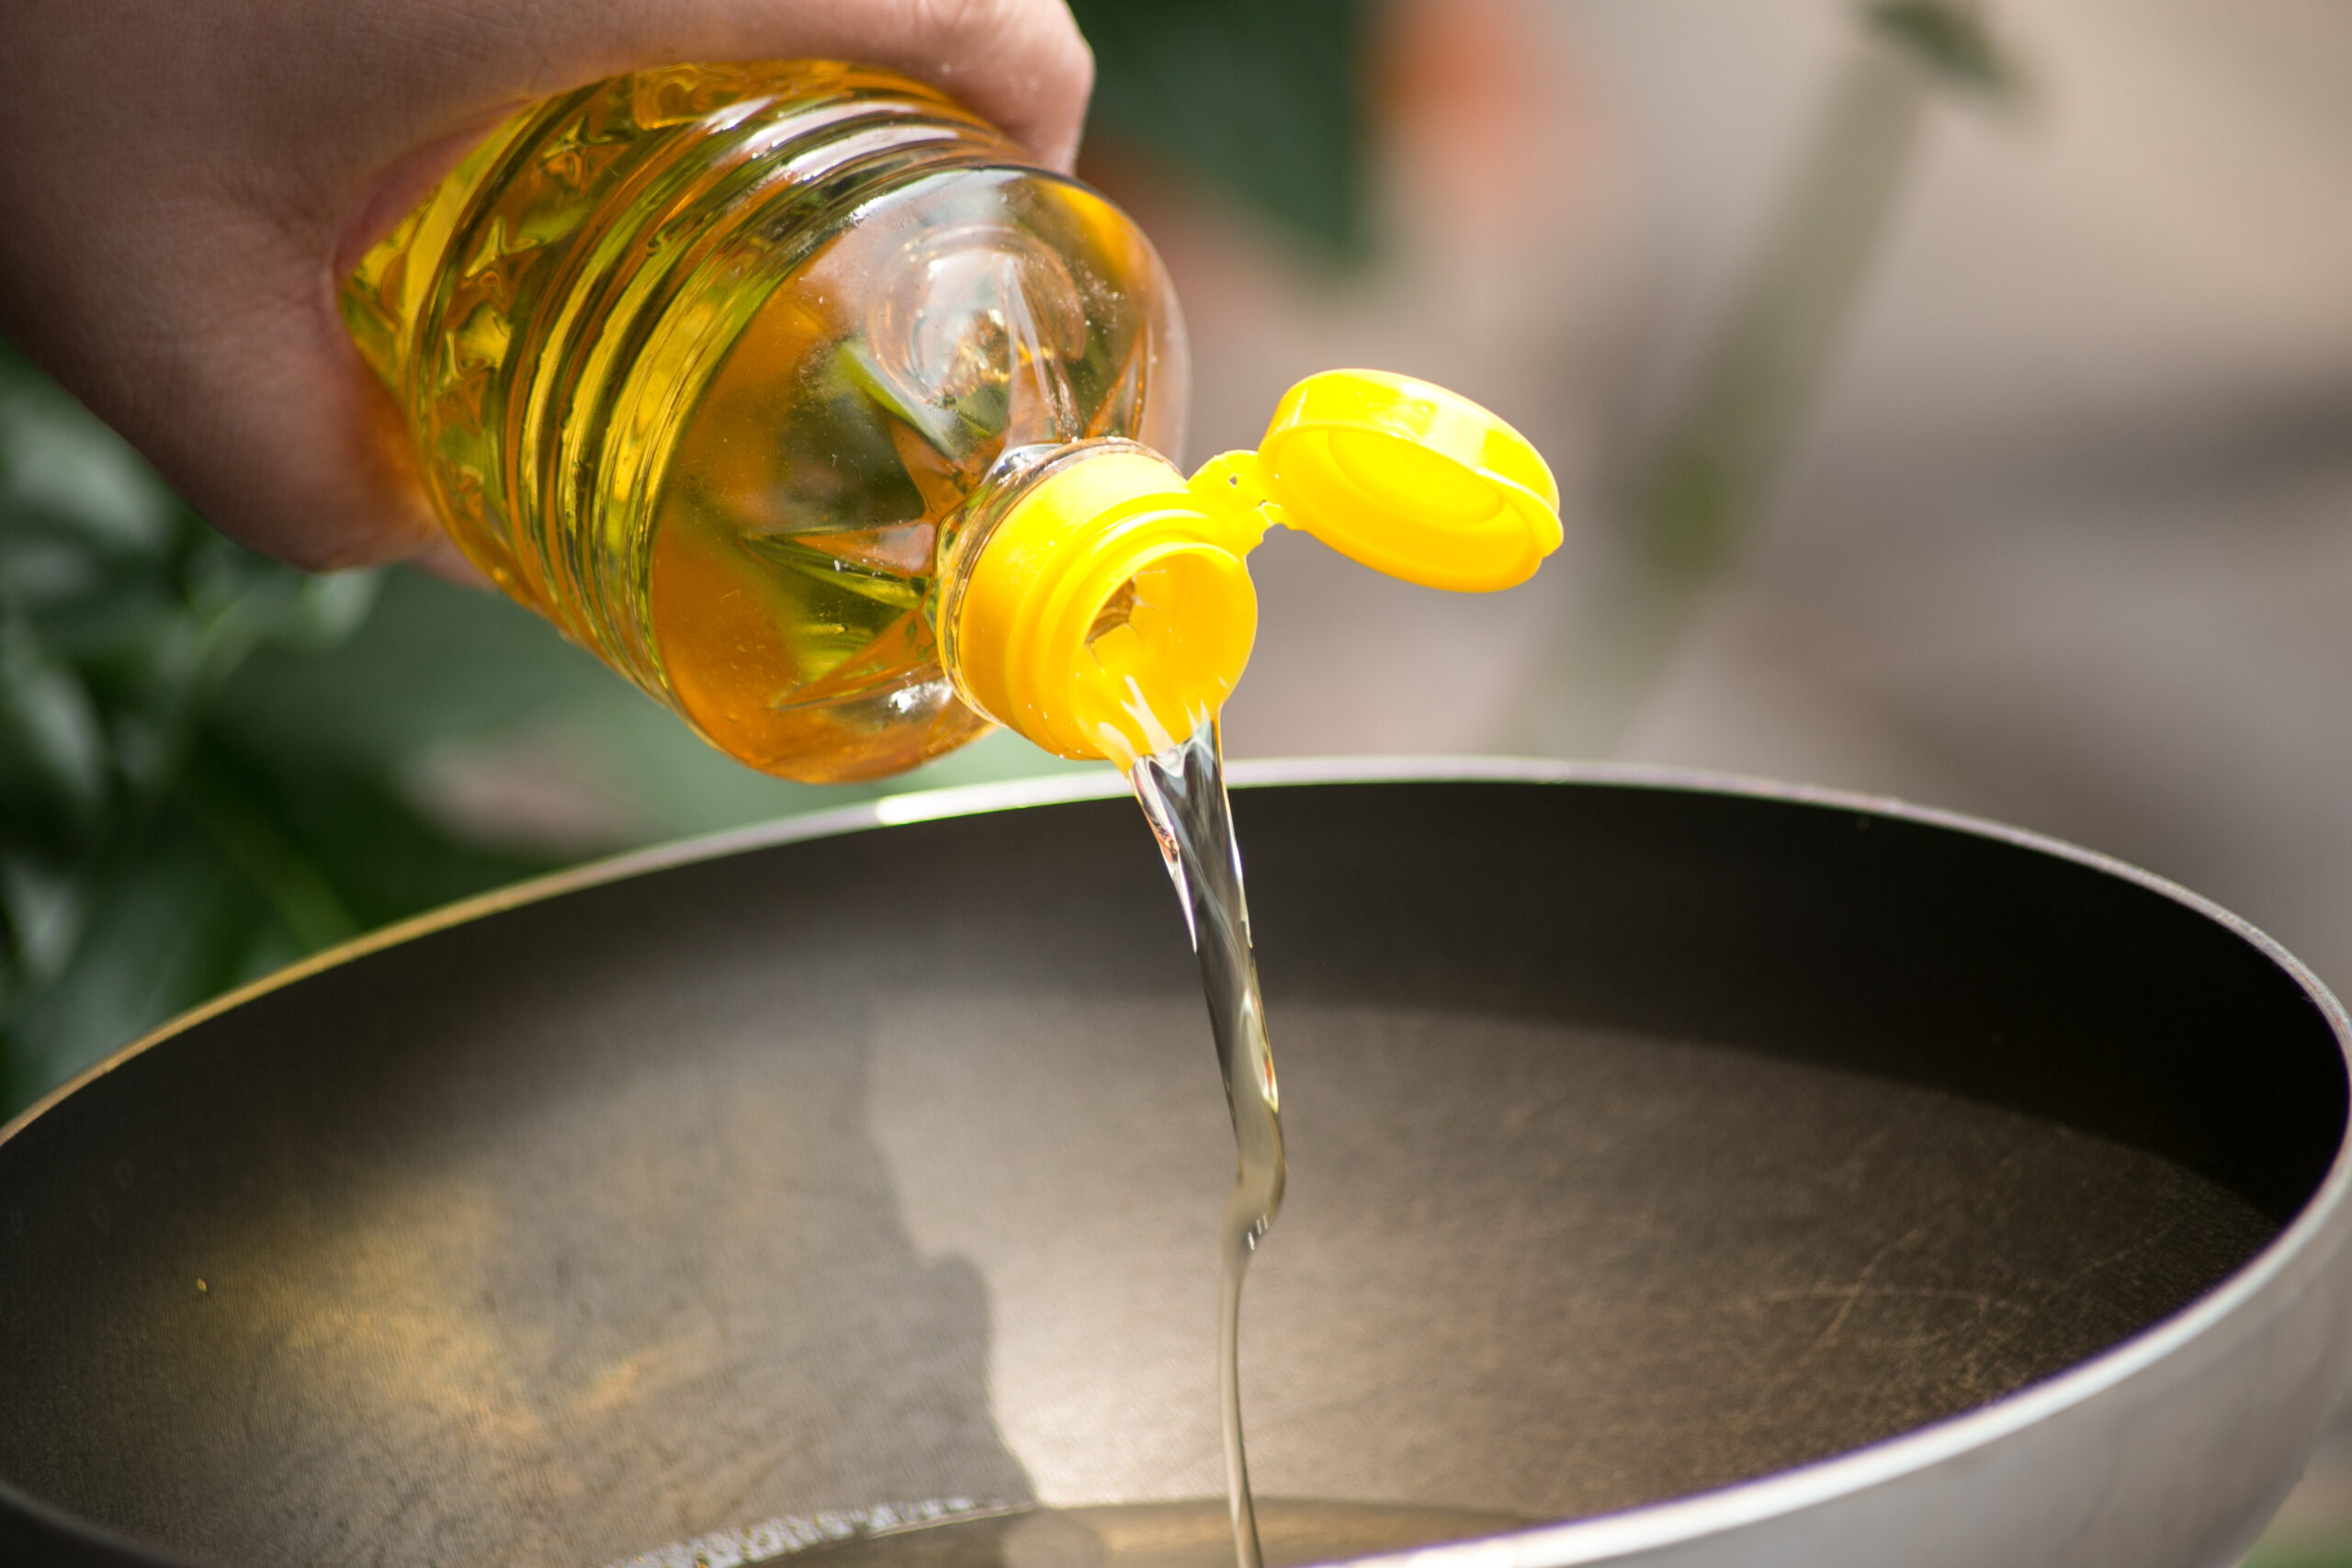 Hydrogenated Vegetable Oil: Uses, Downsides, and Food Sources